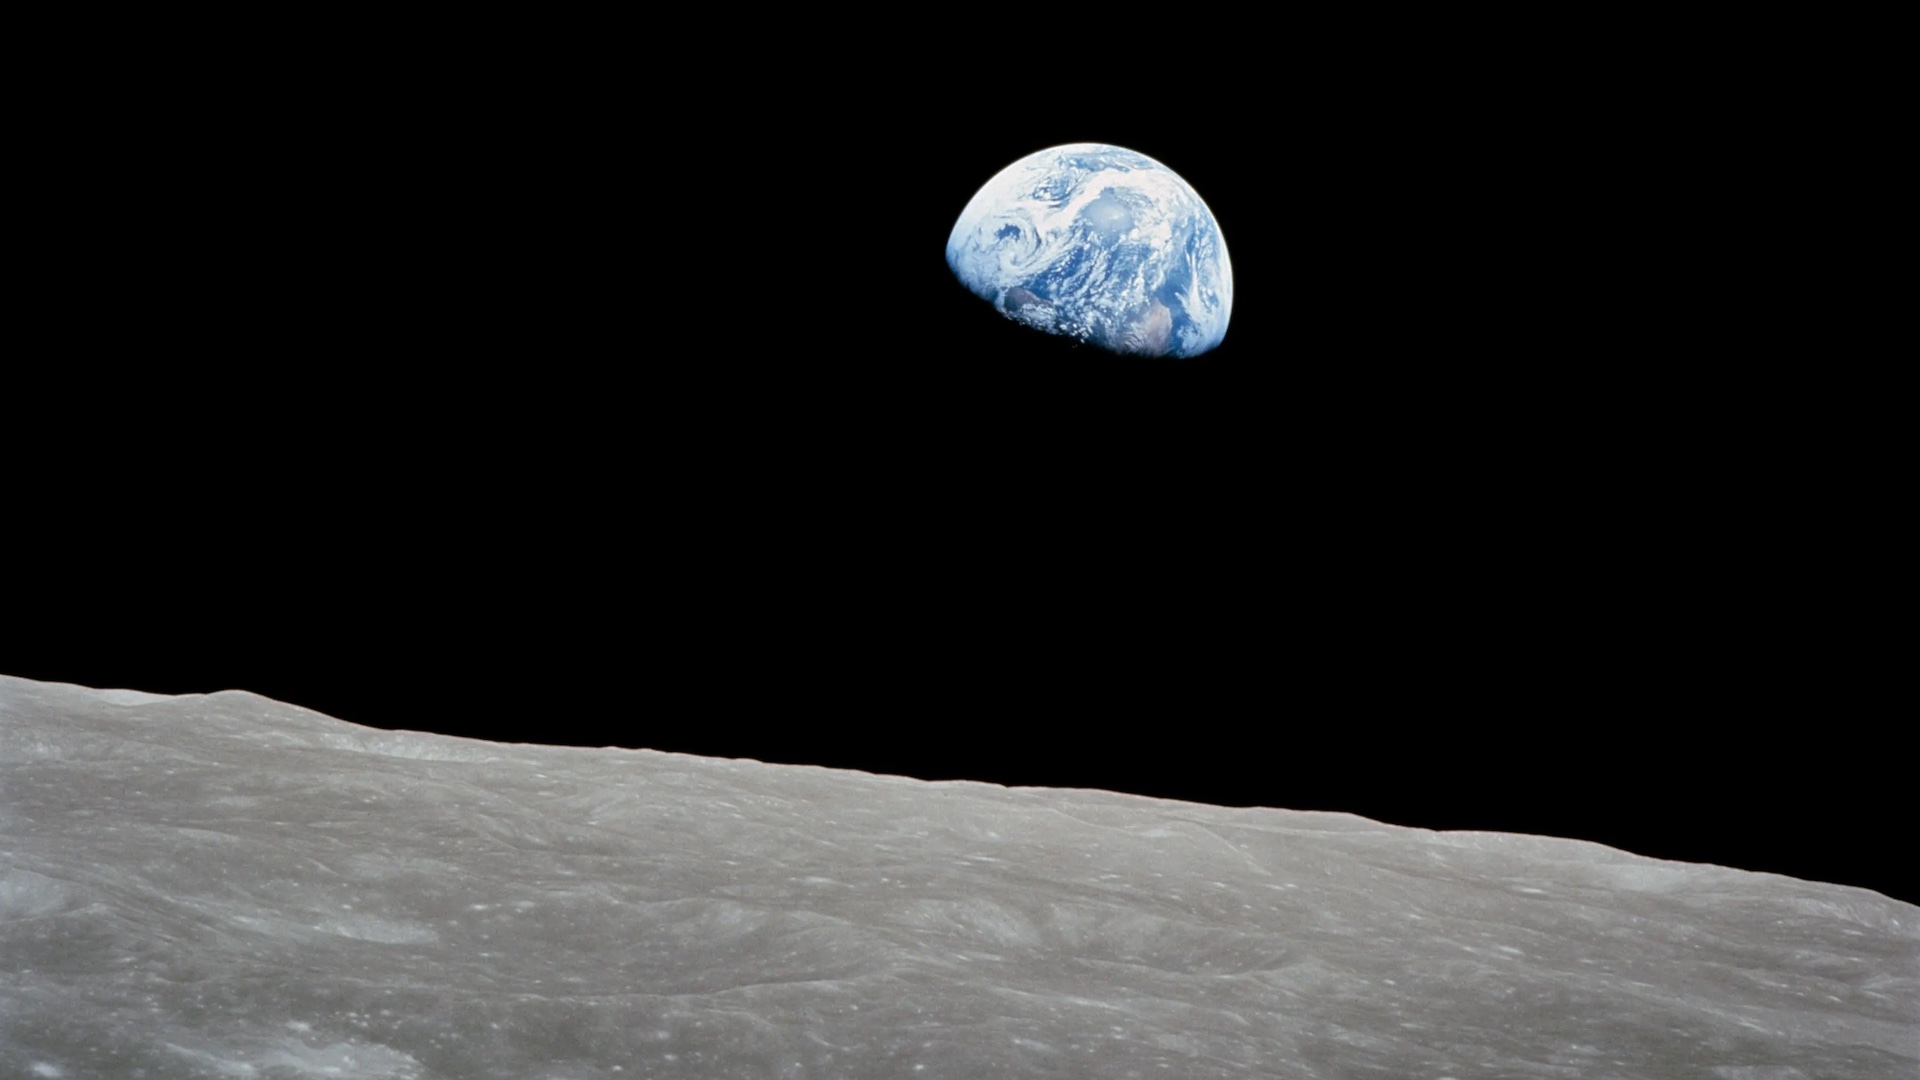  Space photo of the week: 'Earthrise,' the Christmas Eve image that changed the world 